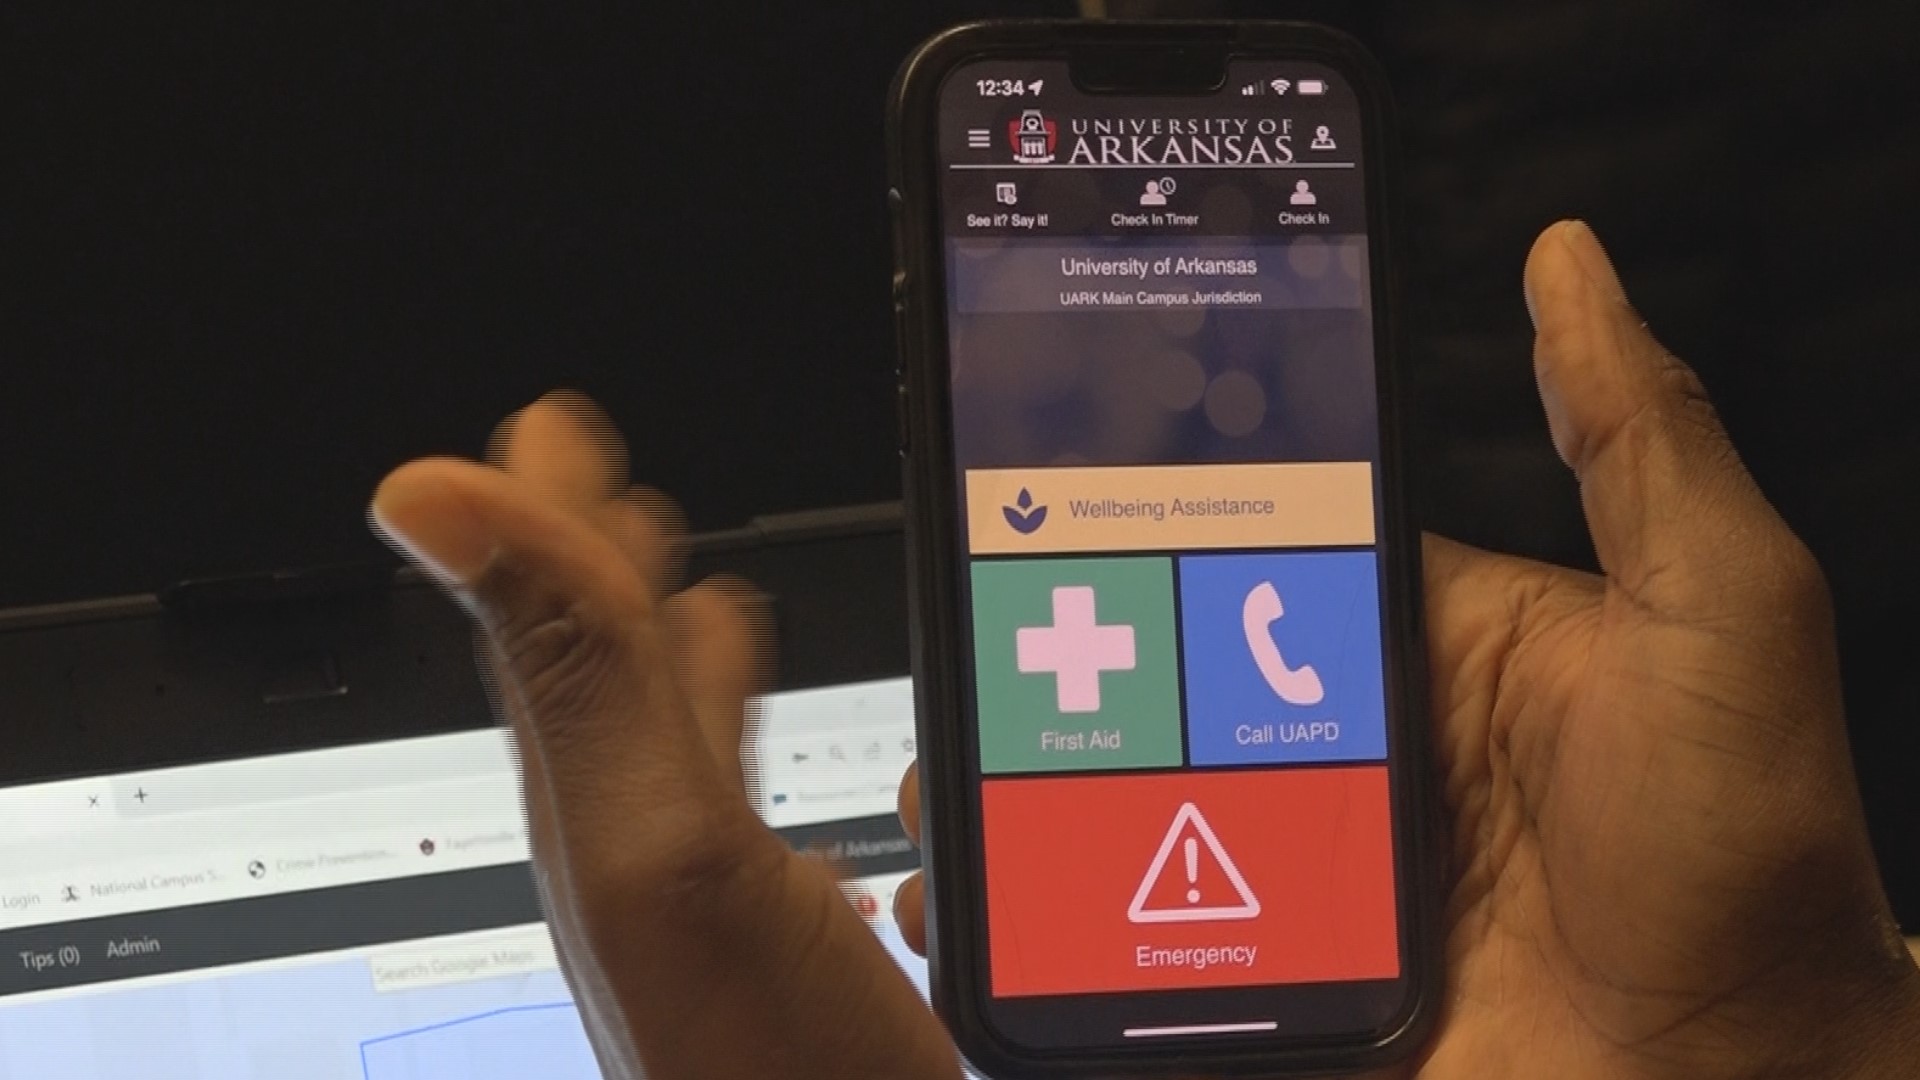 The SafeZone Mobile Safety App allows people on campus to alert UAPD at the click of a button.